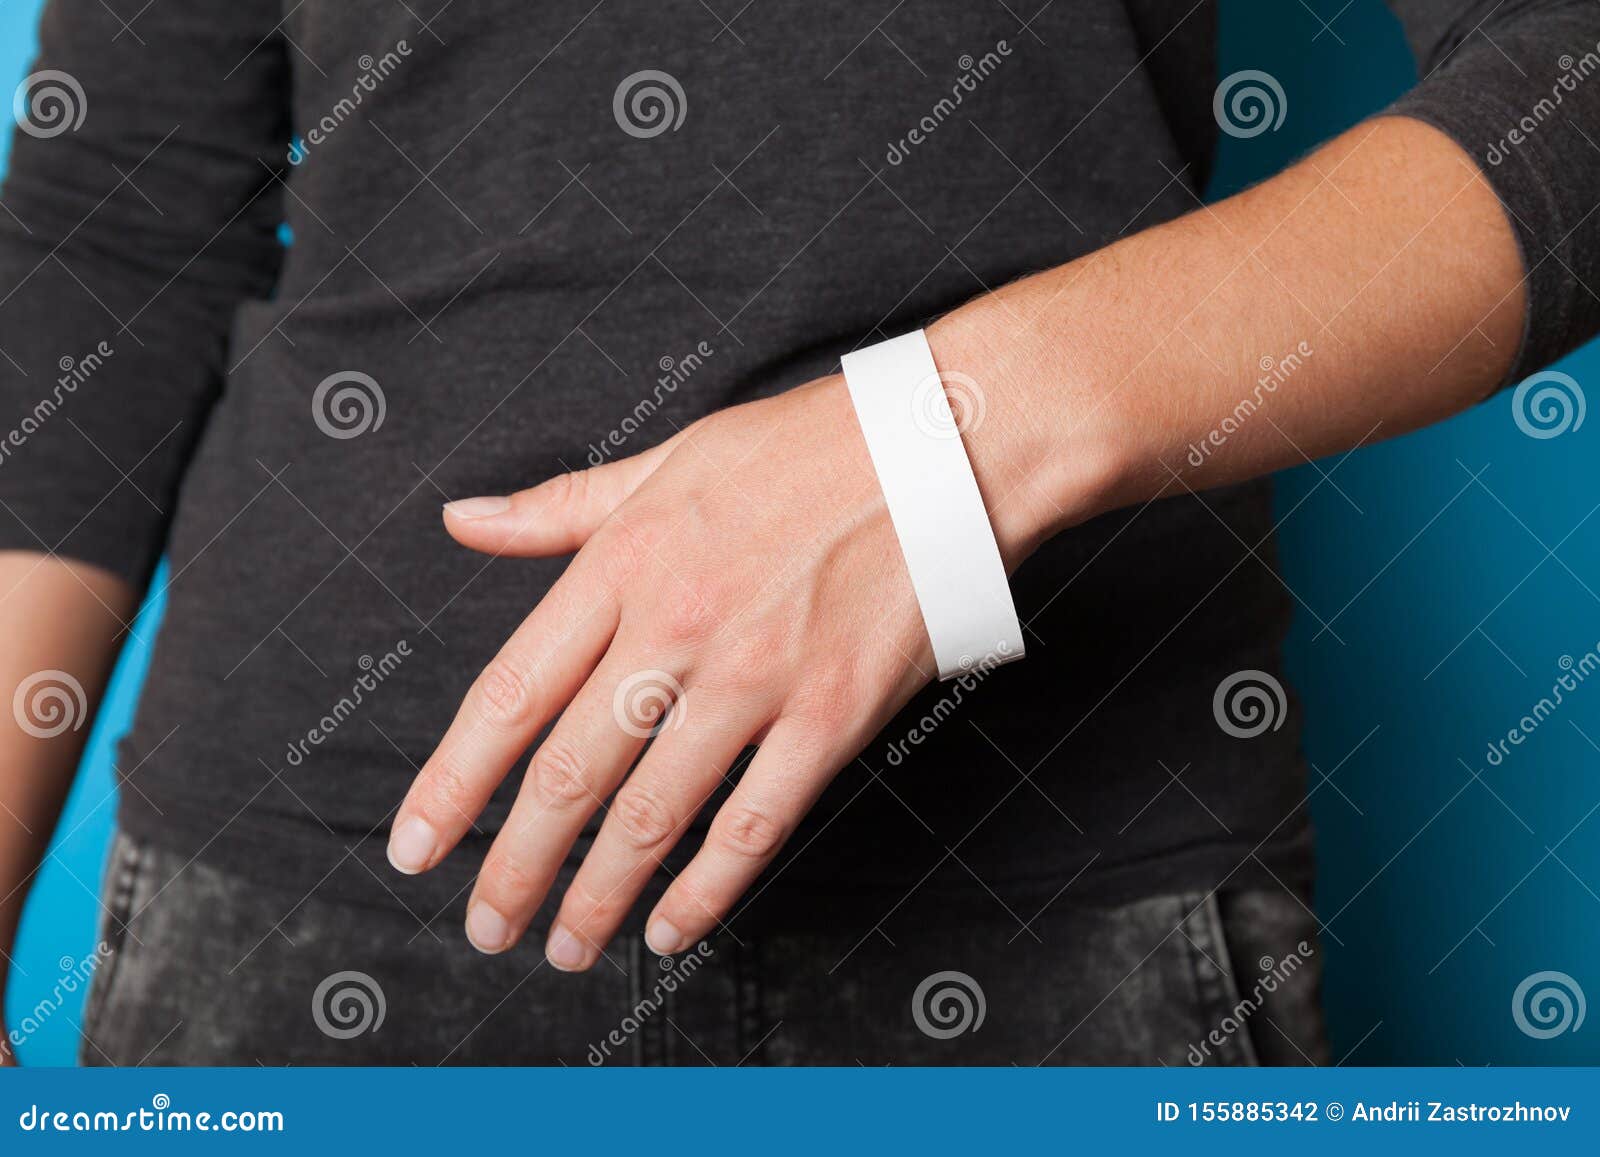 Download Paper Wristband Mockup, Event Bracelet On Hand. Empty Ticket Wrist Band Design Stock Photo ...